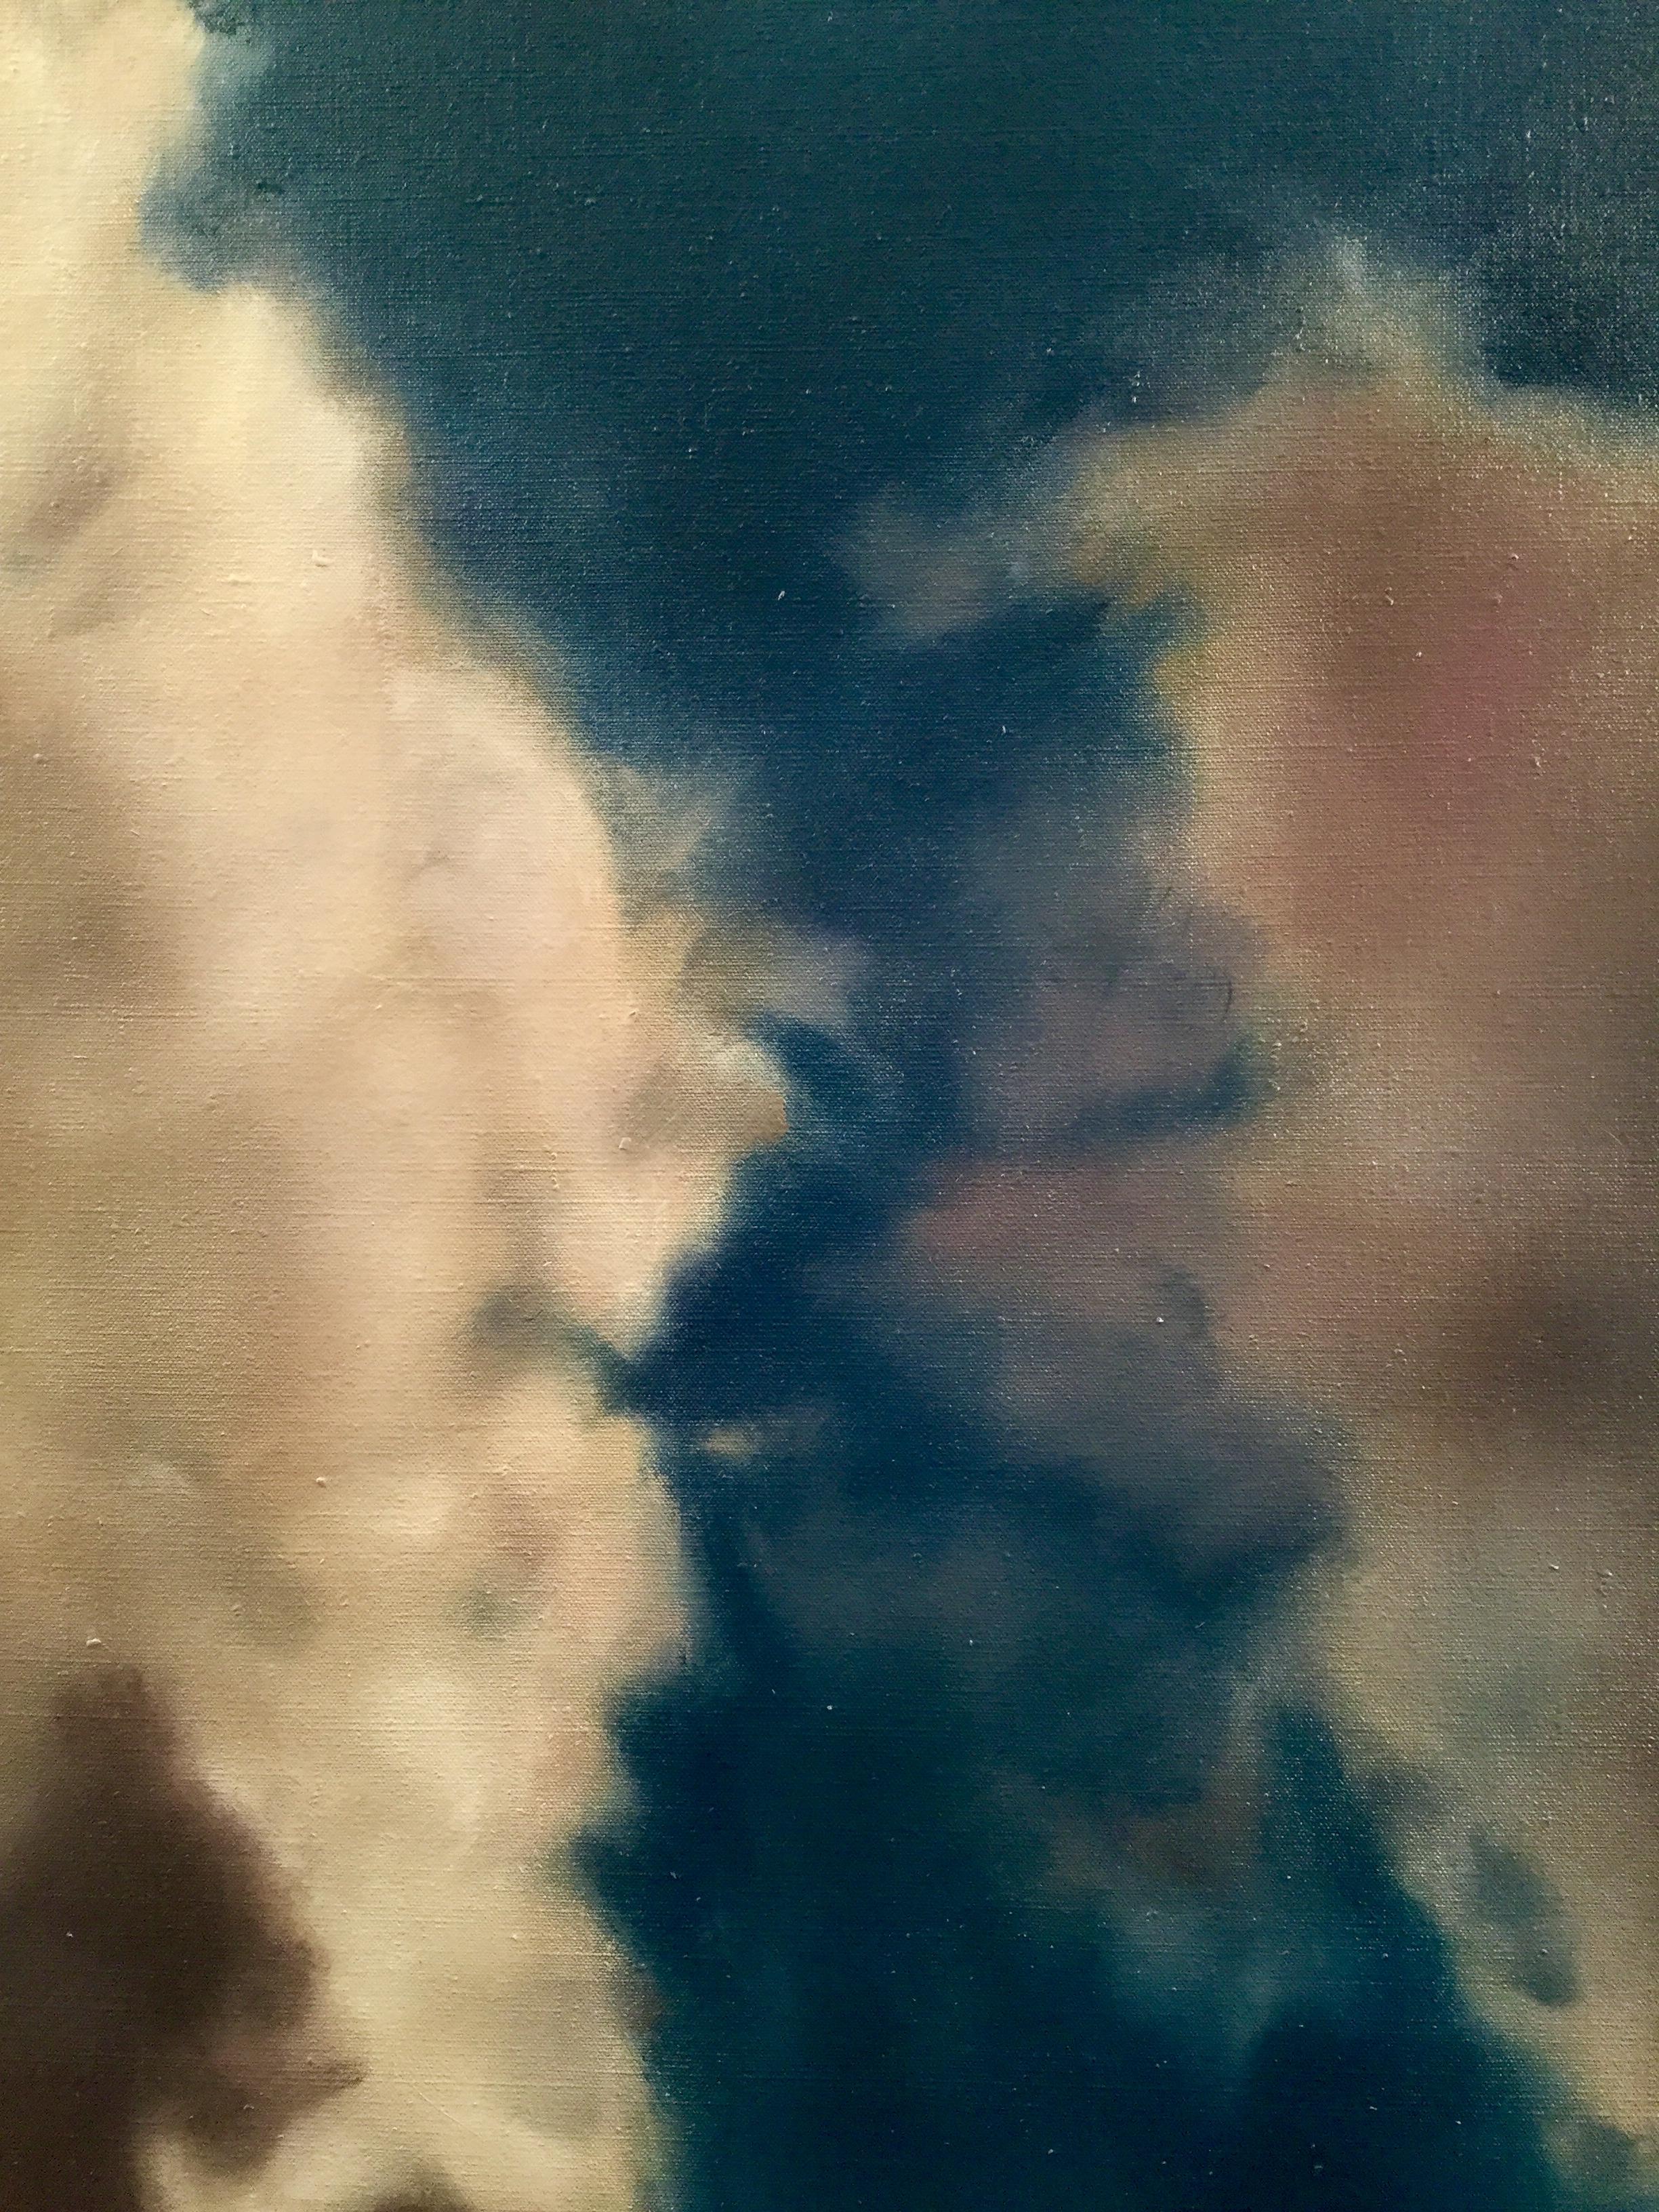 Ether Sans Oiseaux I & II (Ether without Birds) Oil on Linen diptych - CLOUDS - Gray Landscape Painting by Frédéric Choisel